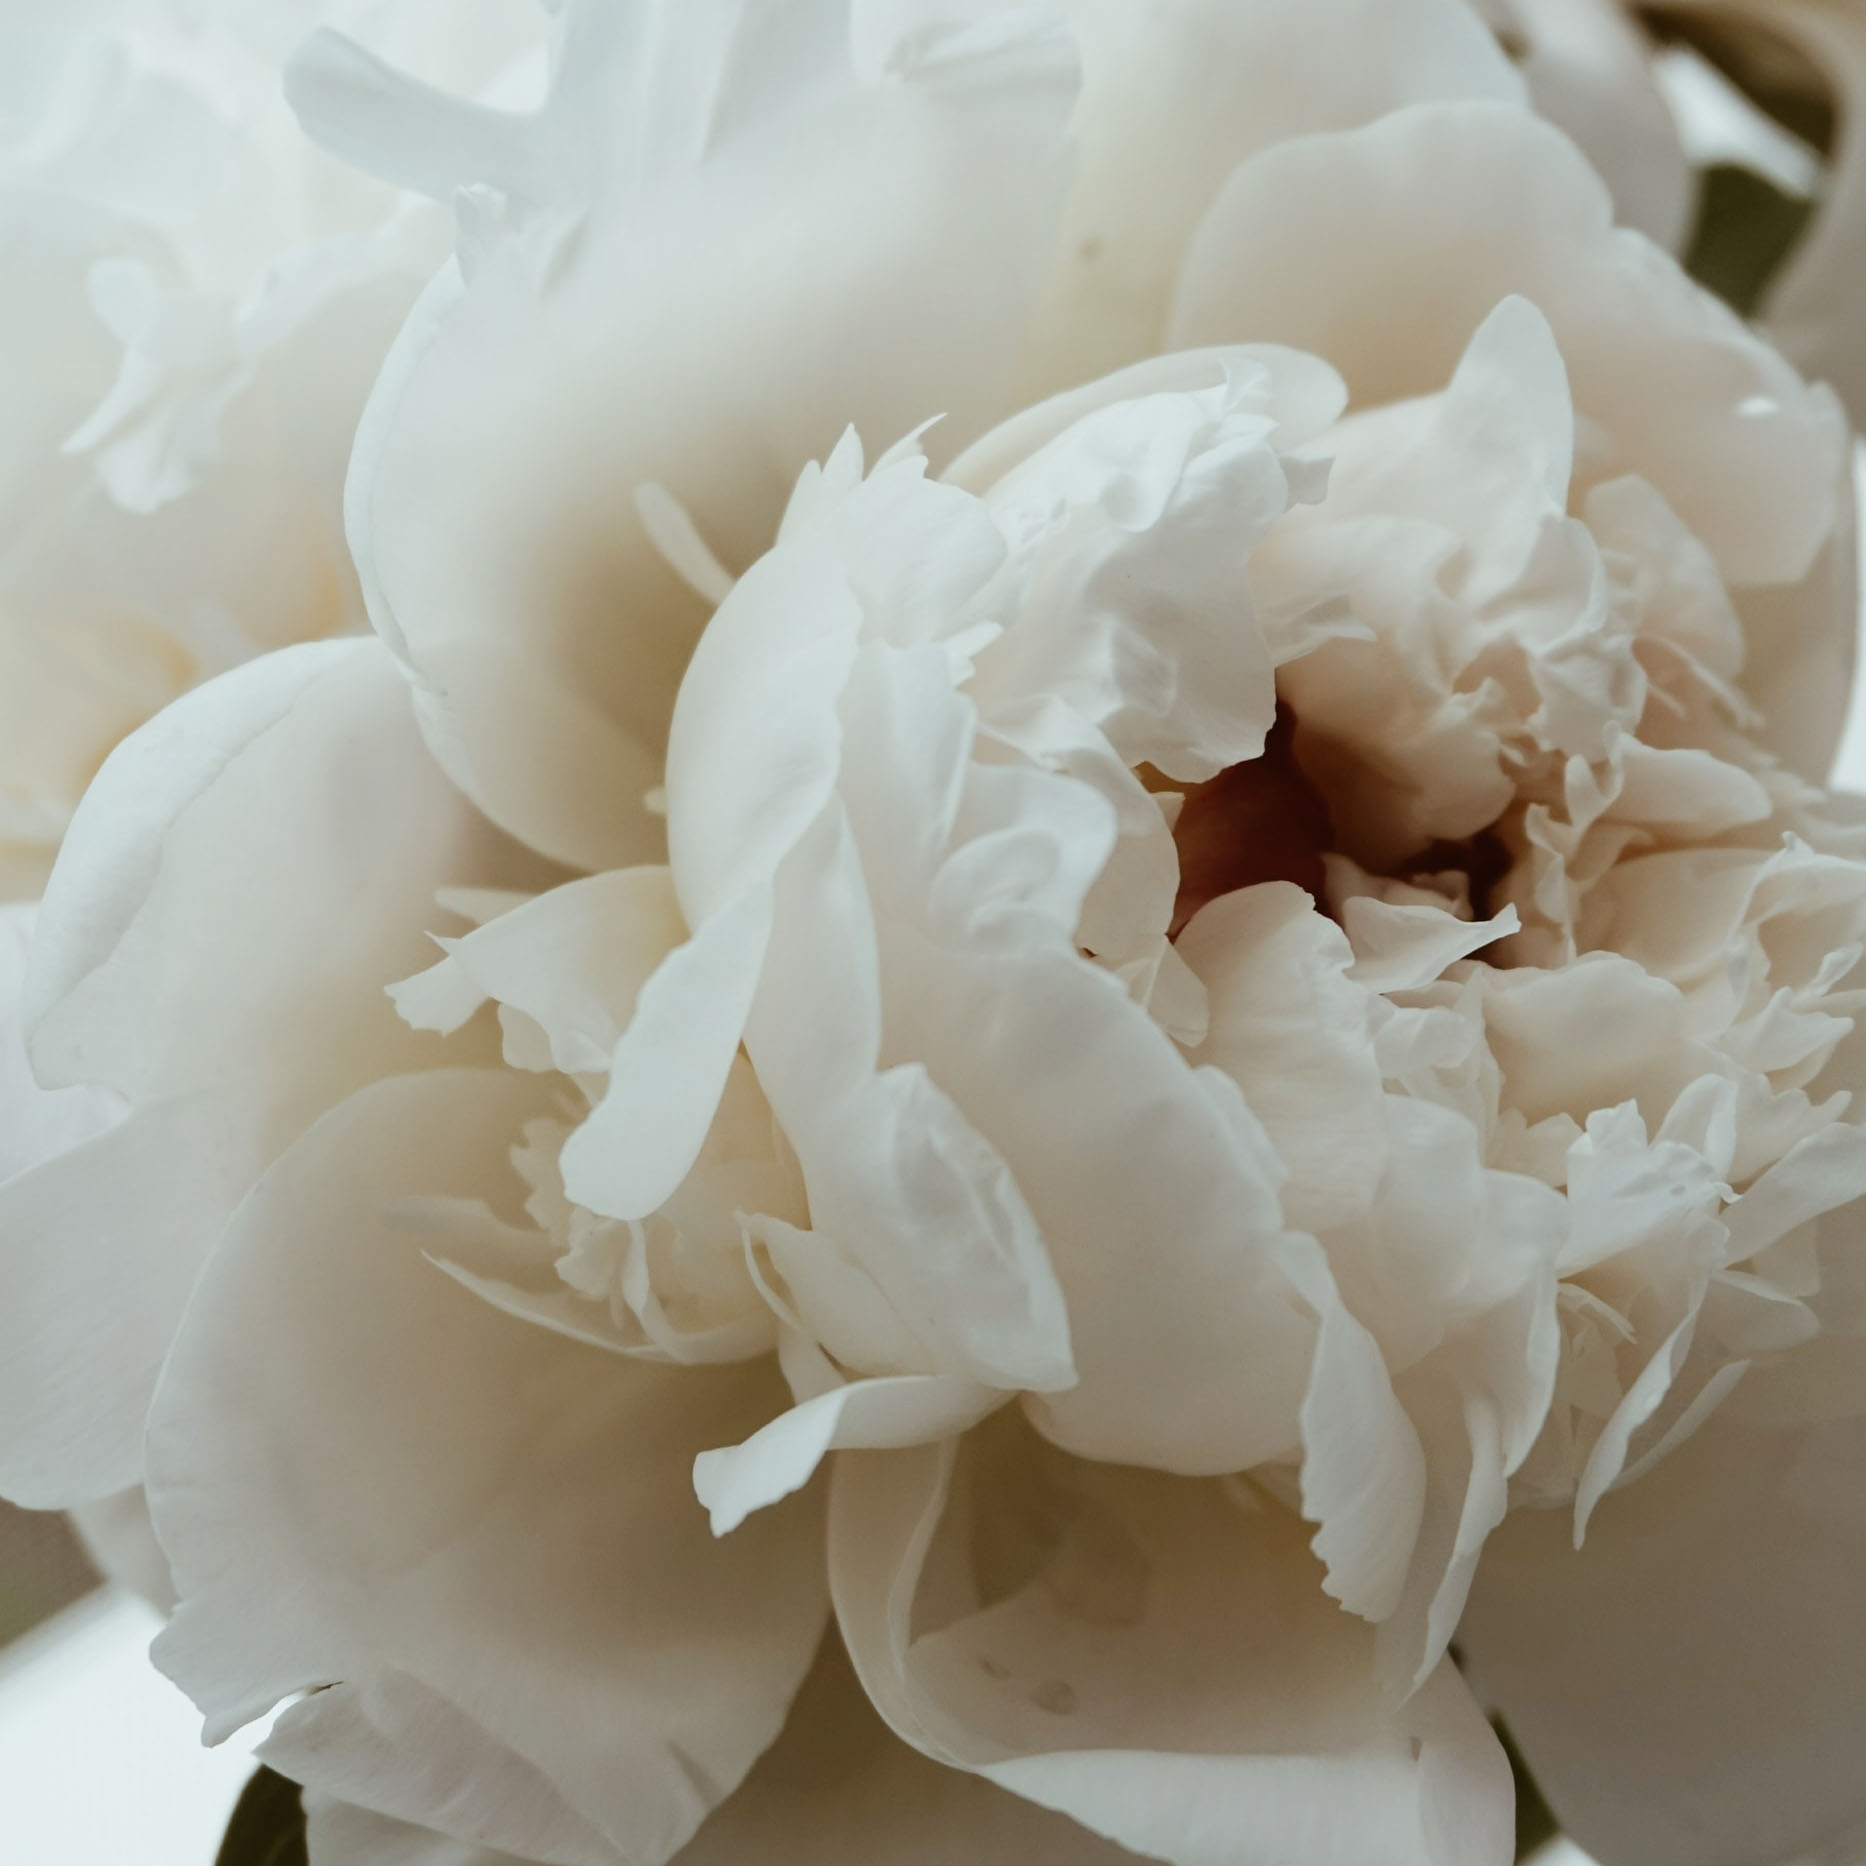 How and When to Divide Herbaceous Peonies?